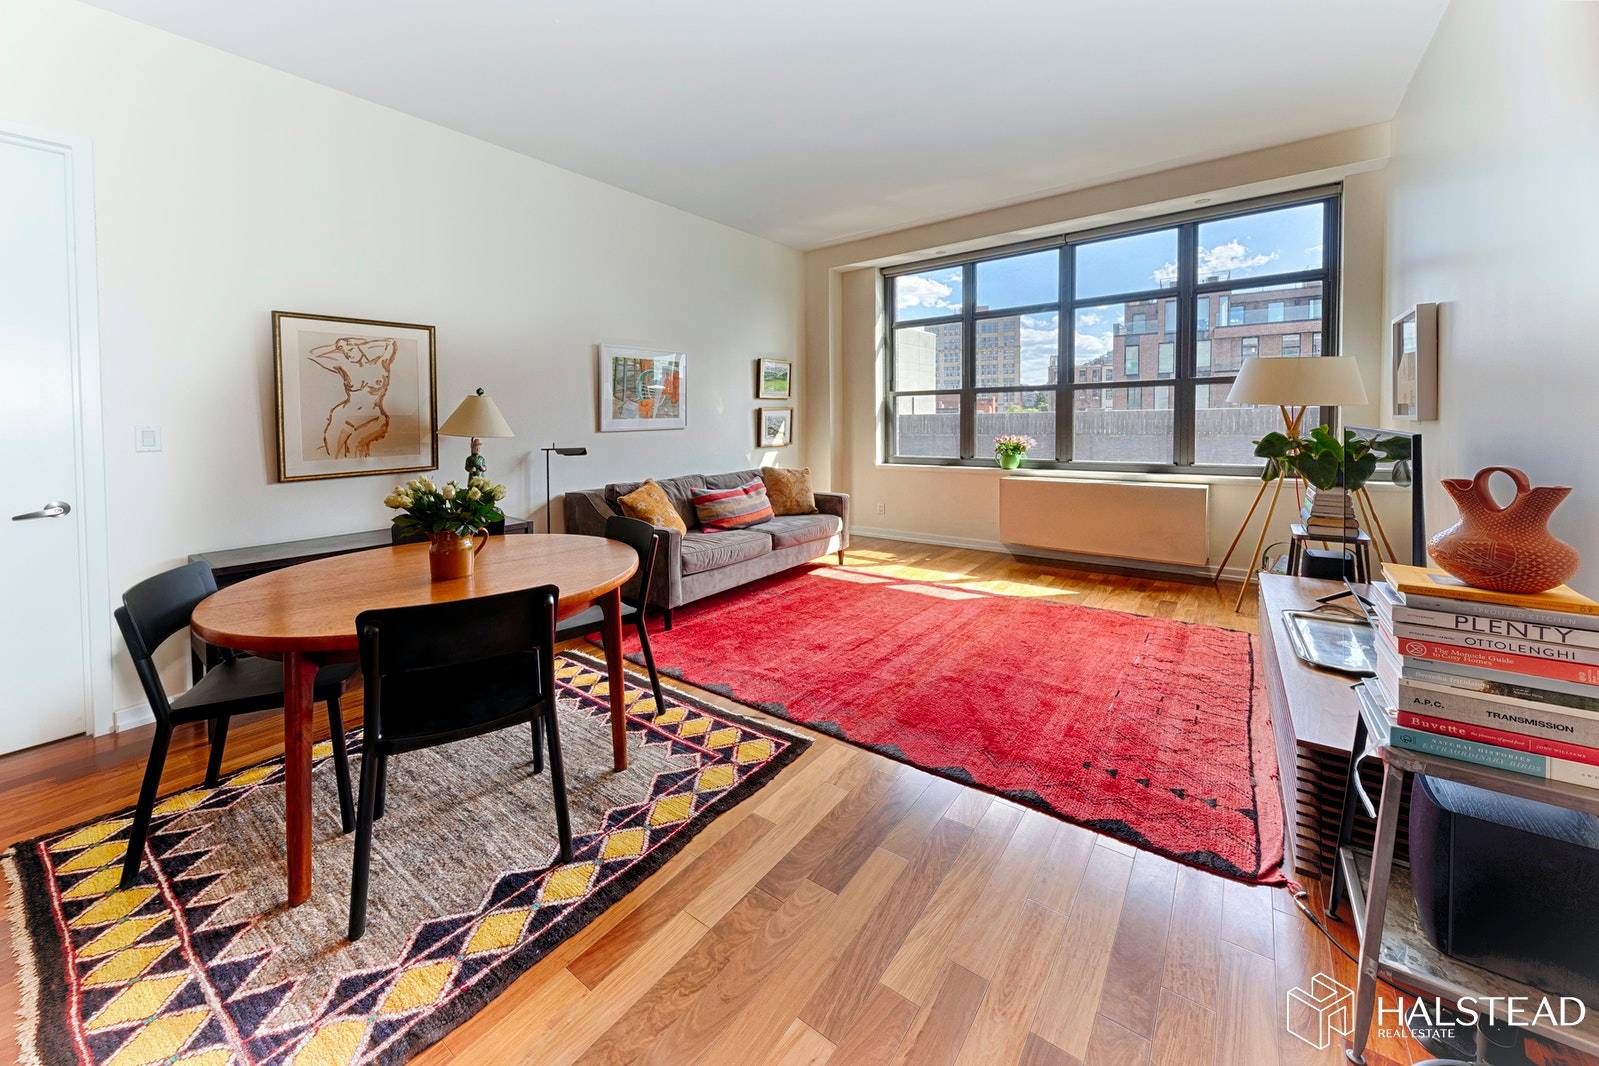 Introducing a rarely available 80 Met two bedroom gem !